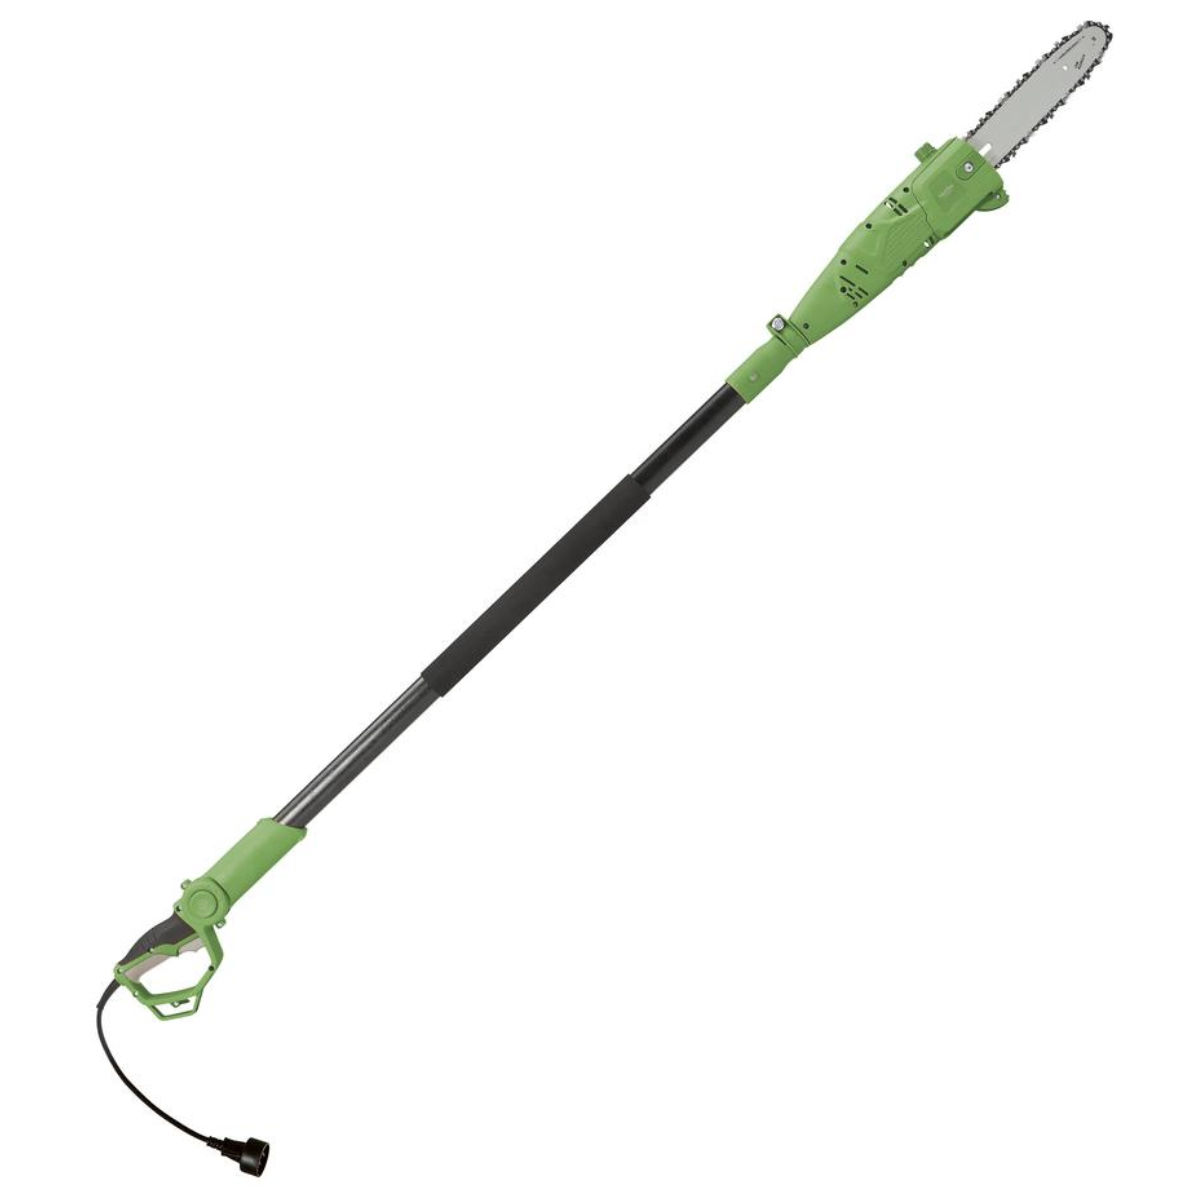 Martha Stewart Living MTS-PS10 10 in. 7 Amp Telescoping Electric Pole Saw